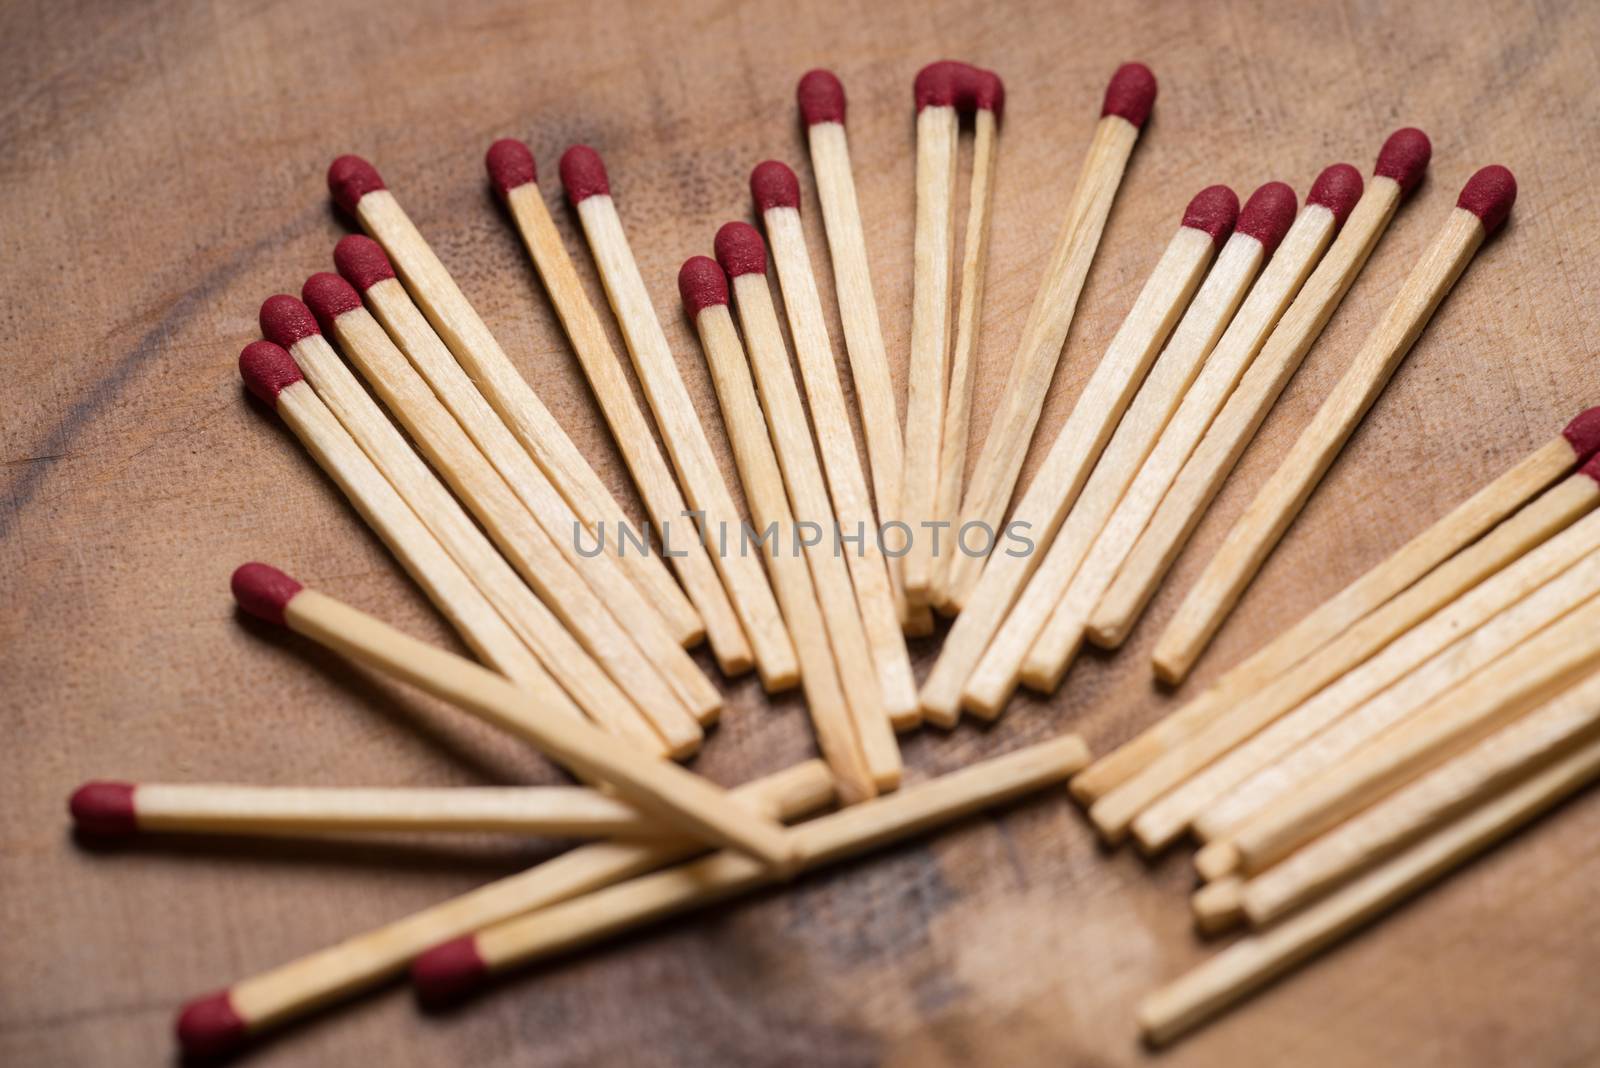 Matches on wooden table background.